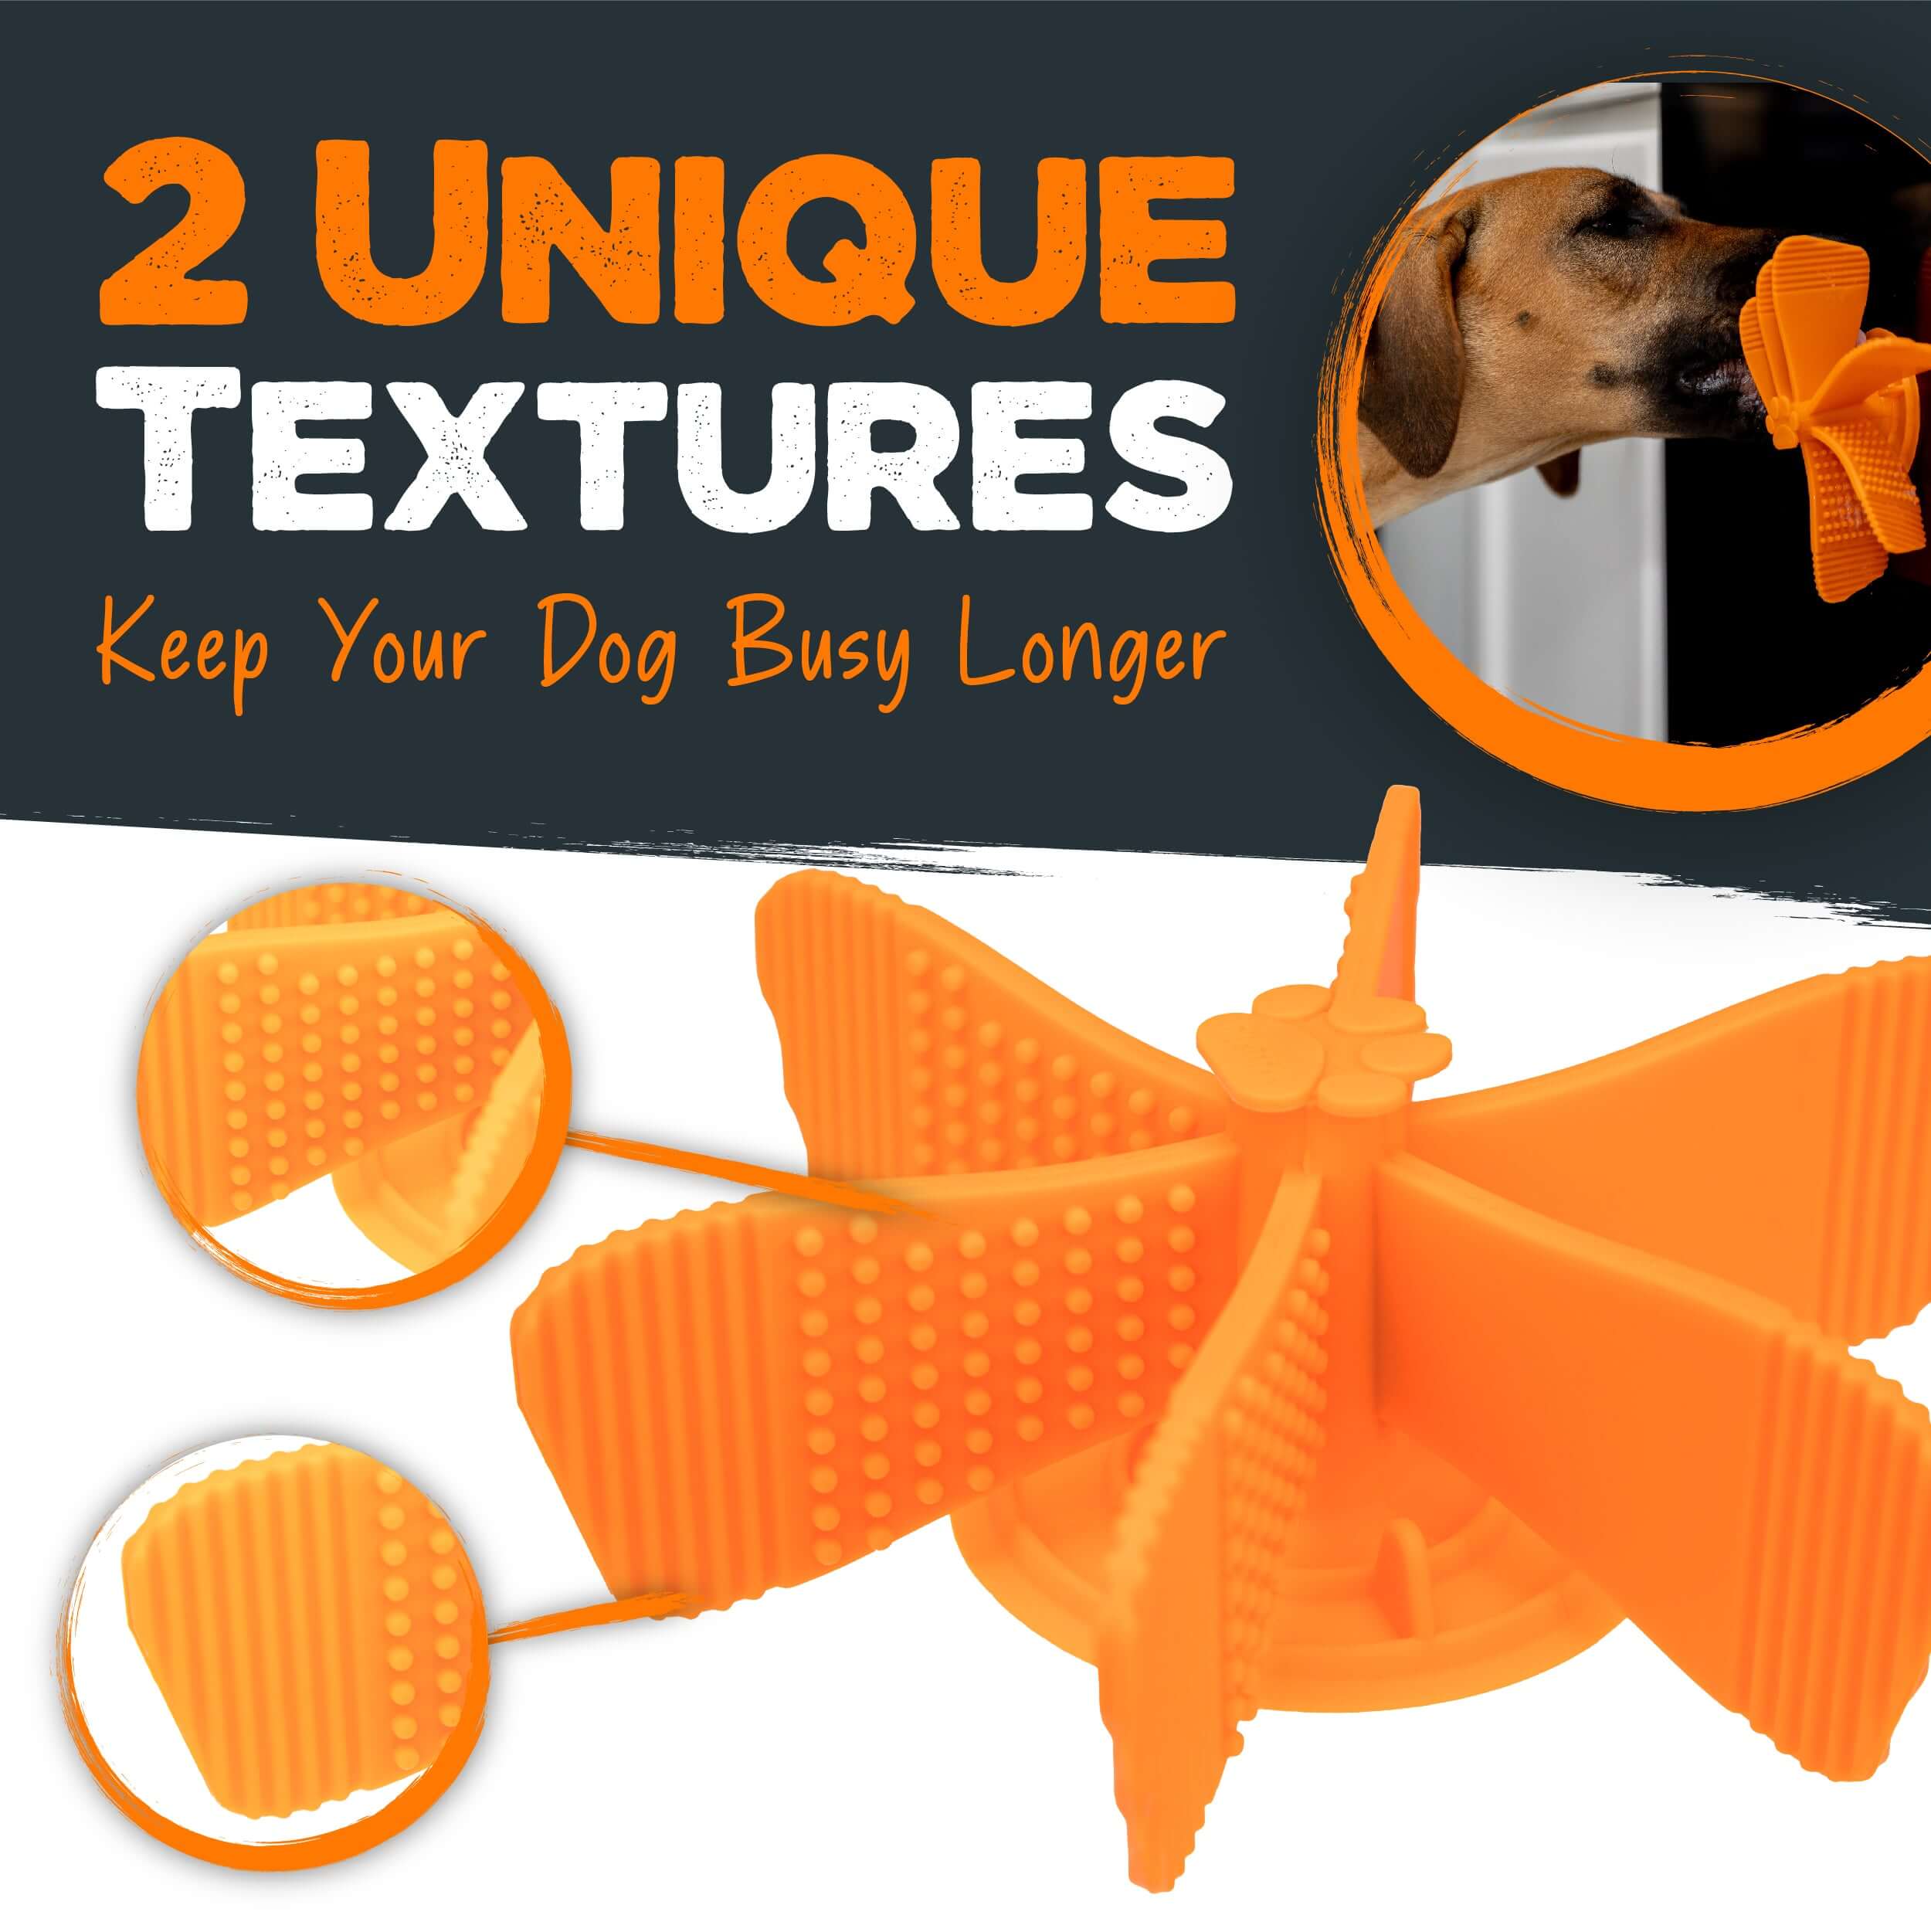 BPA-Free Slow Feeder Insert for Dogs - Reduce Gulping and Overeating